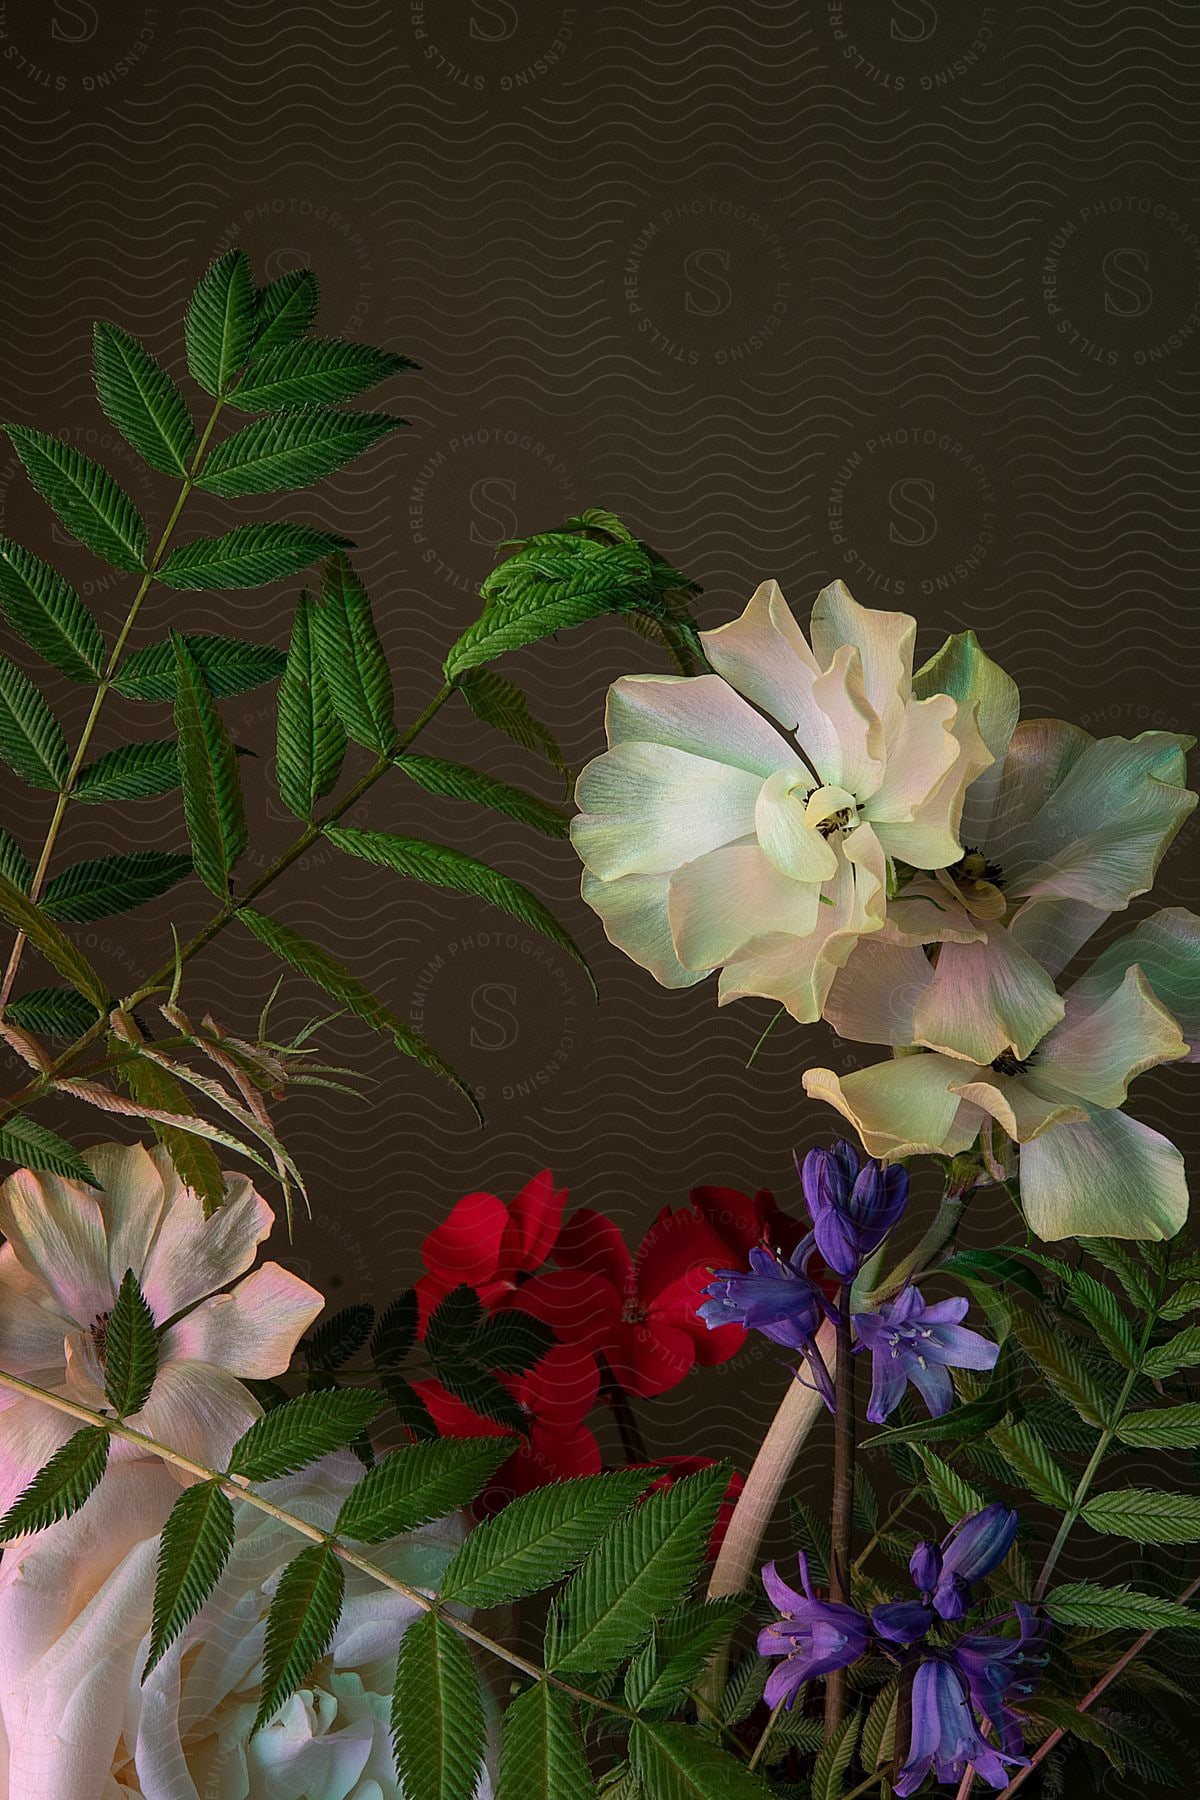 Arrangement of various species of flowers and leaves with thin stems against a dark background.